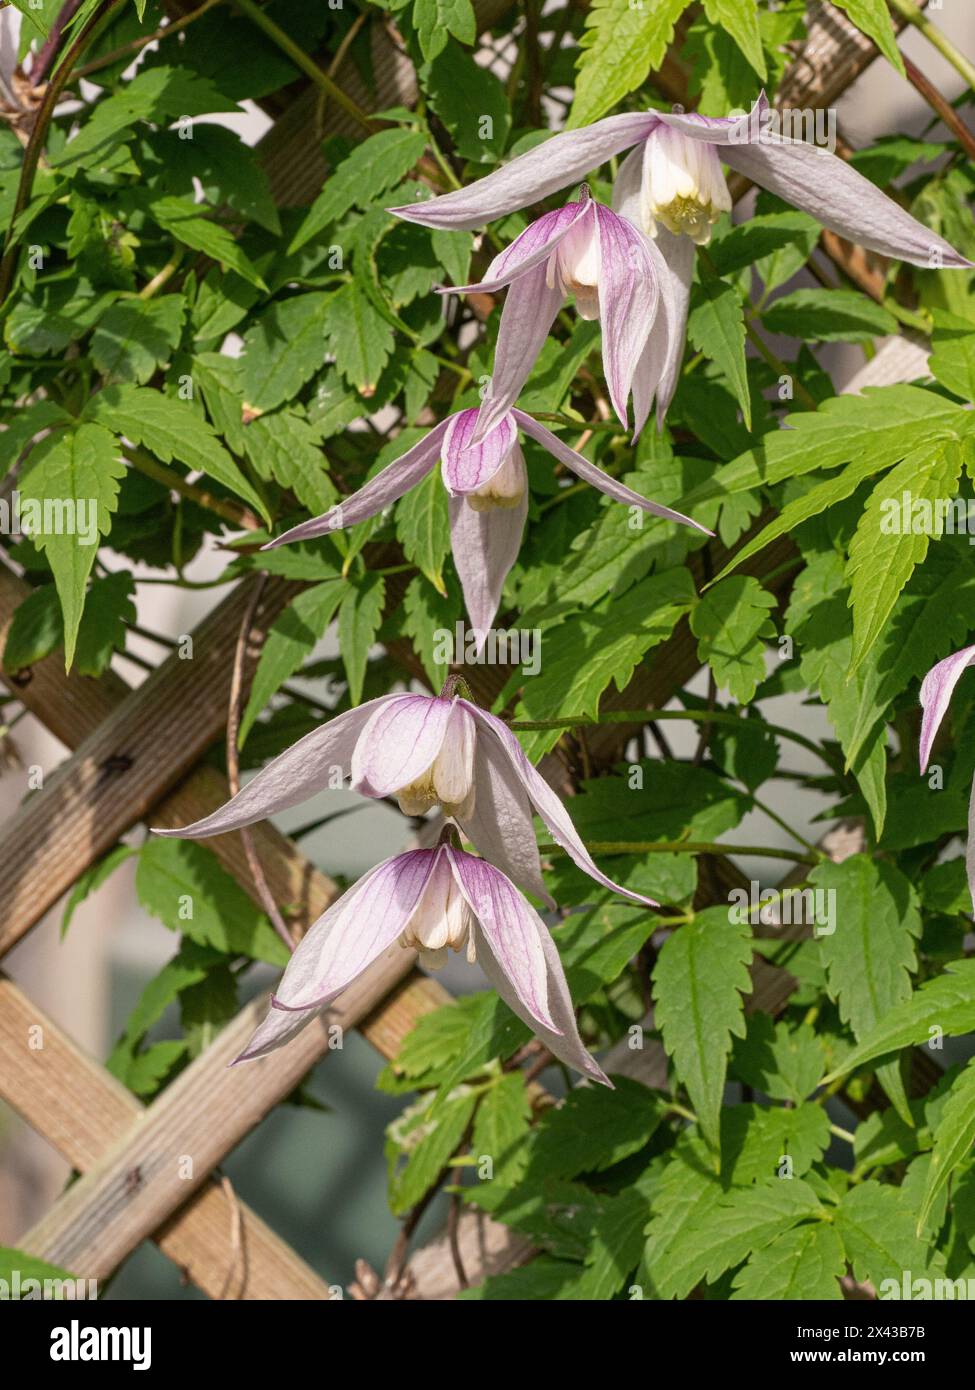 The early flowering climber Clematis alpina 'Willy' with its delicate pale pink flowers growing on a trellis. Stock Photo